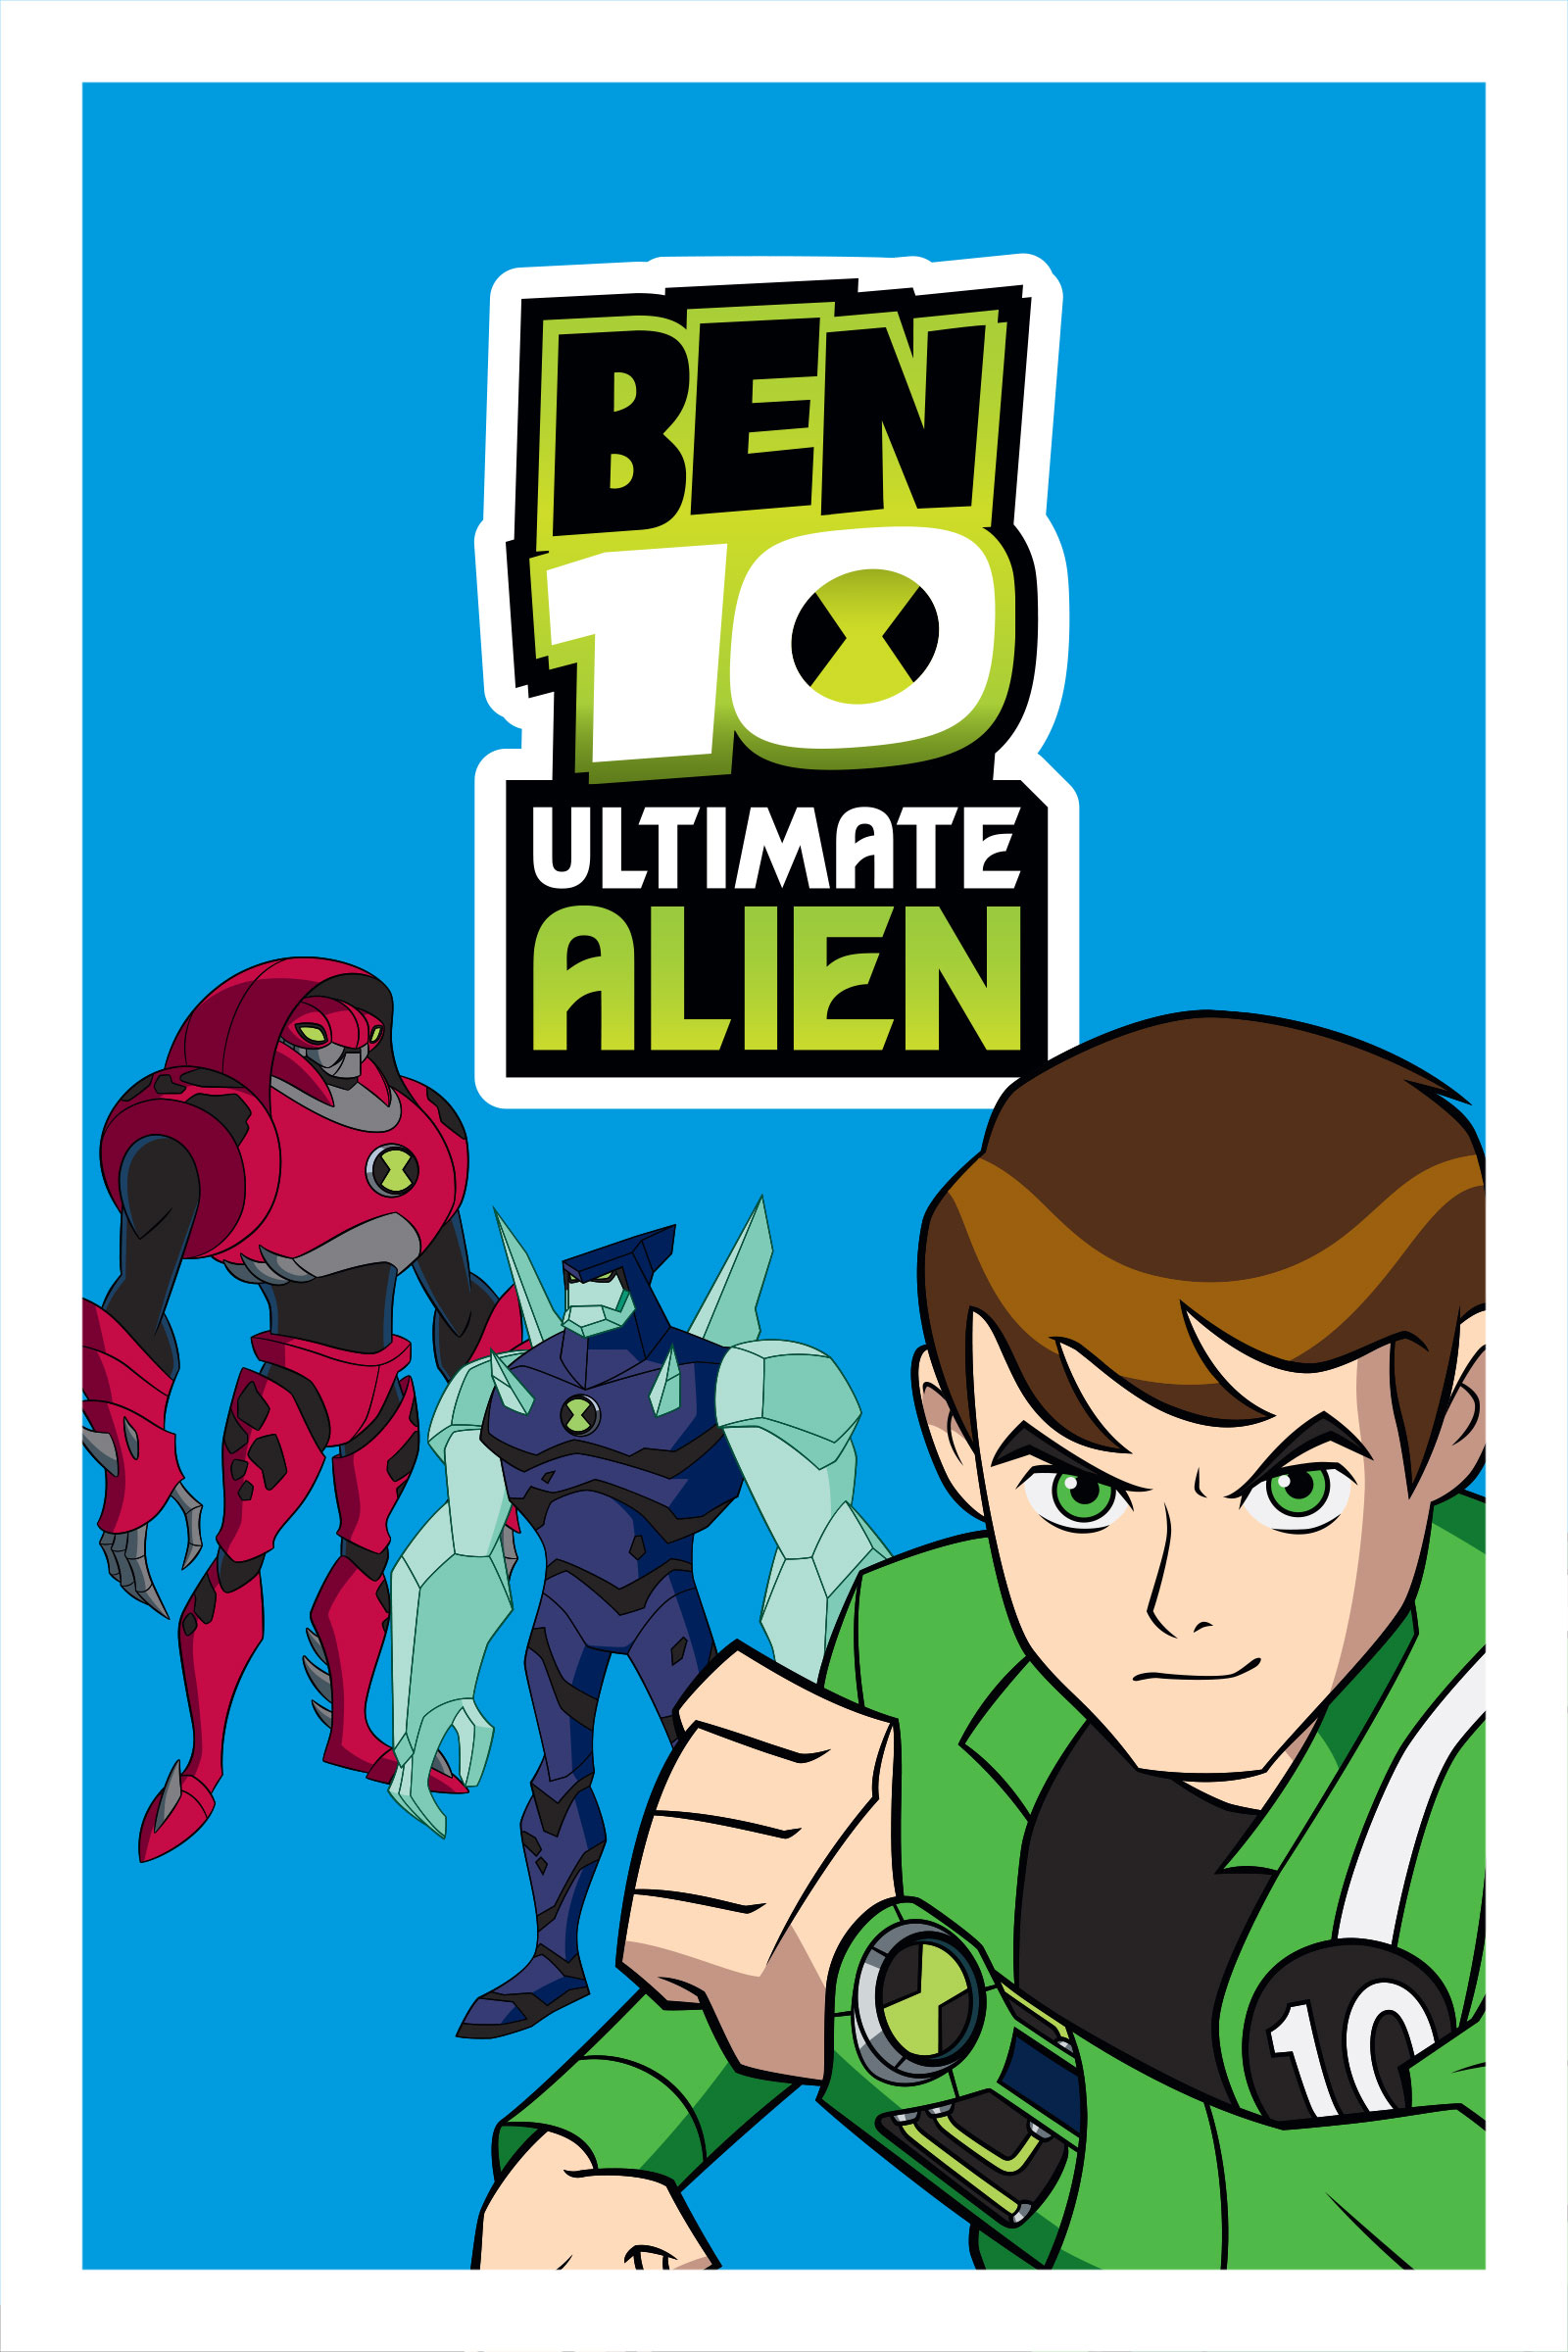 Ben 10 Ultimate Alien Ben 10: Ultimate Alien - Where to Watch and Stream - TV Guide